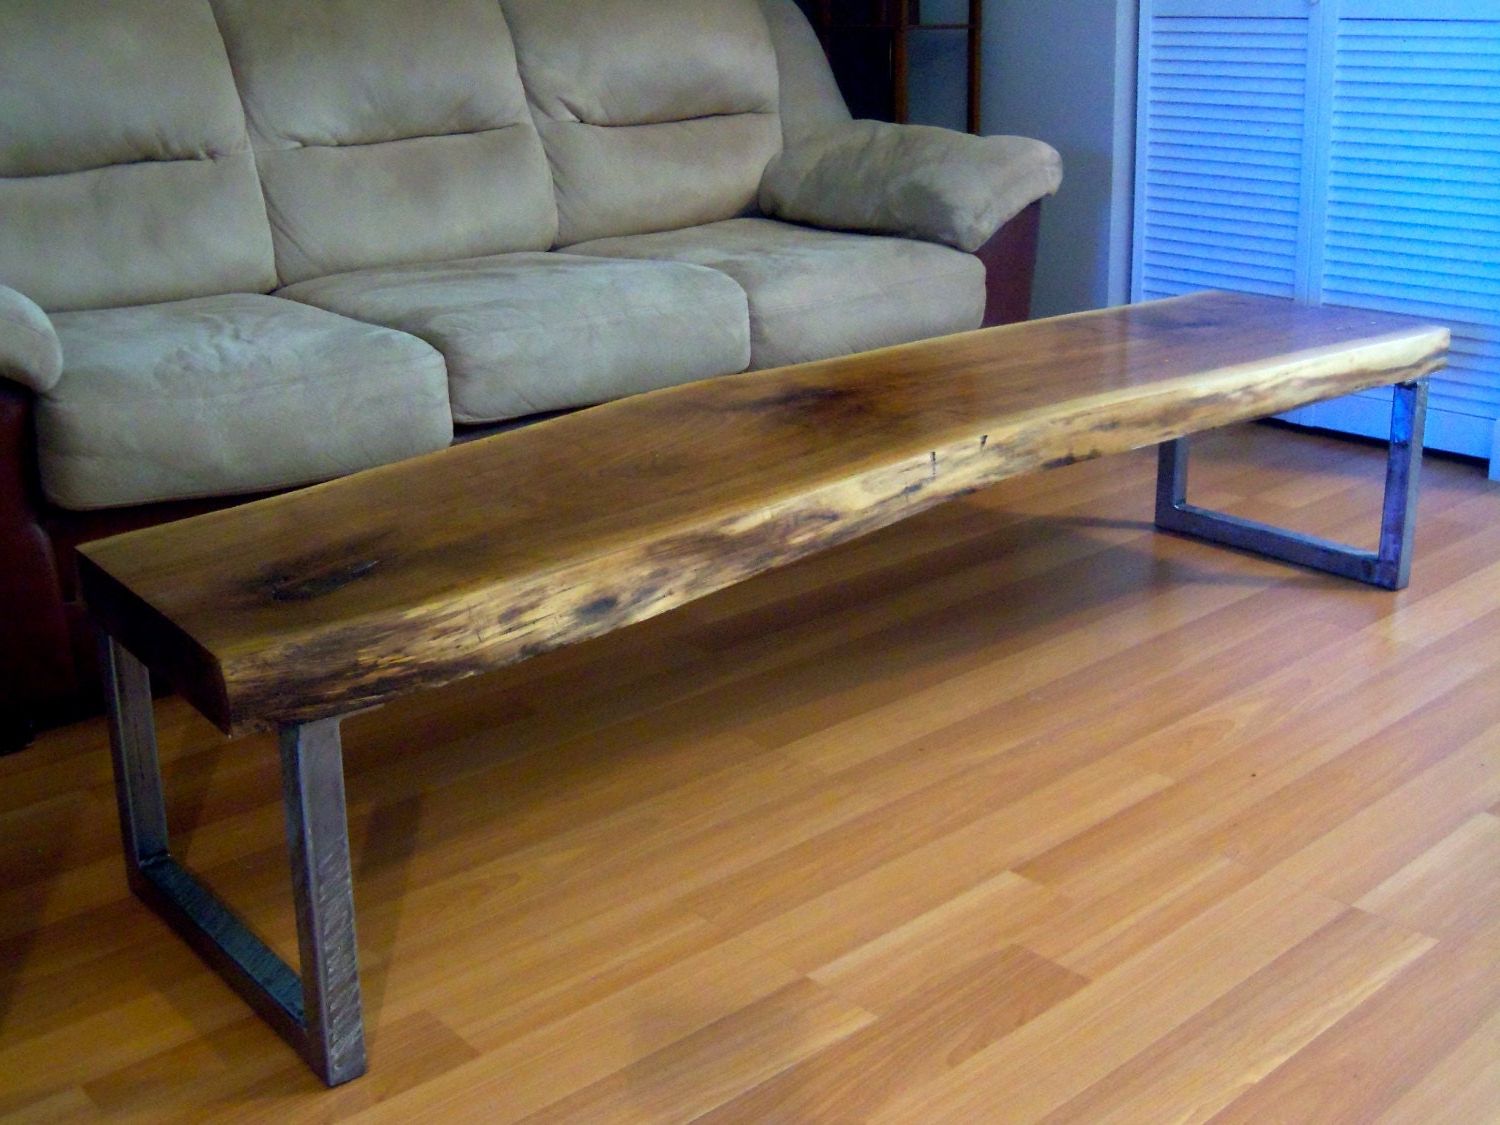 Live Edge Black Walnut Slab Coffee Table Intended For Well Known Walnut Coffee Tables (Gallery 7 of 20)